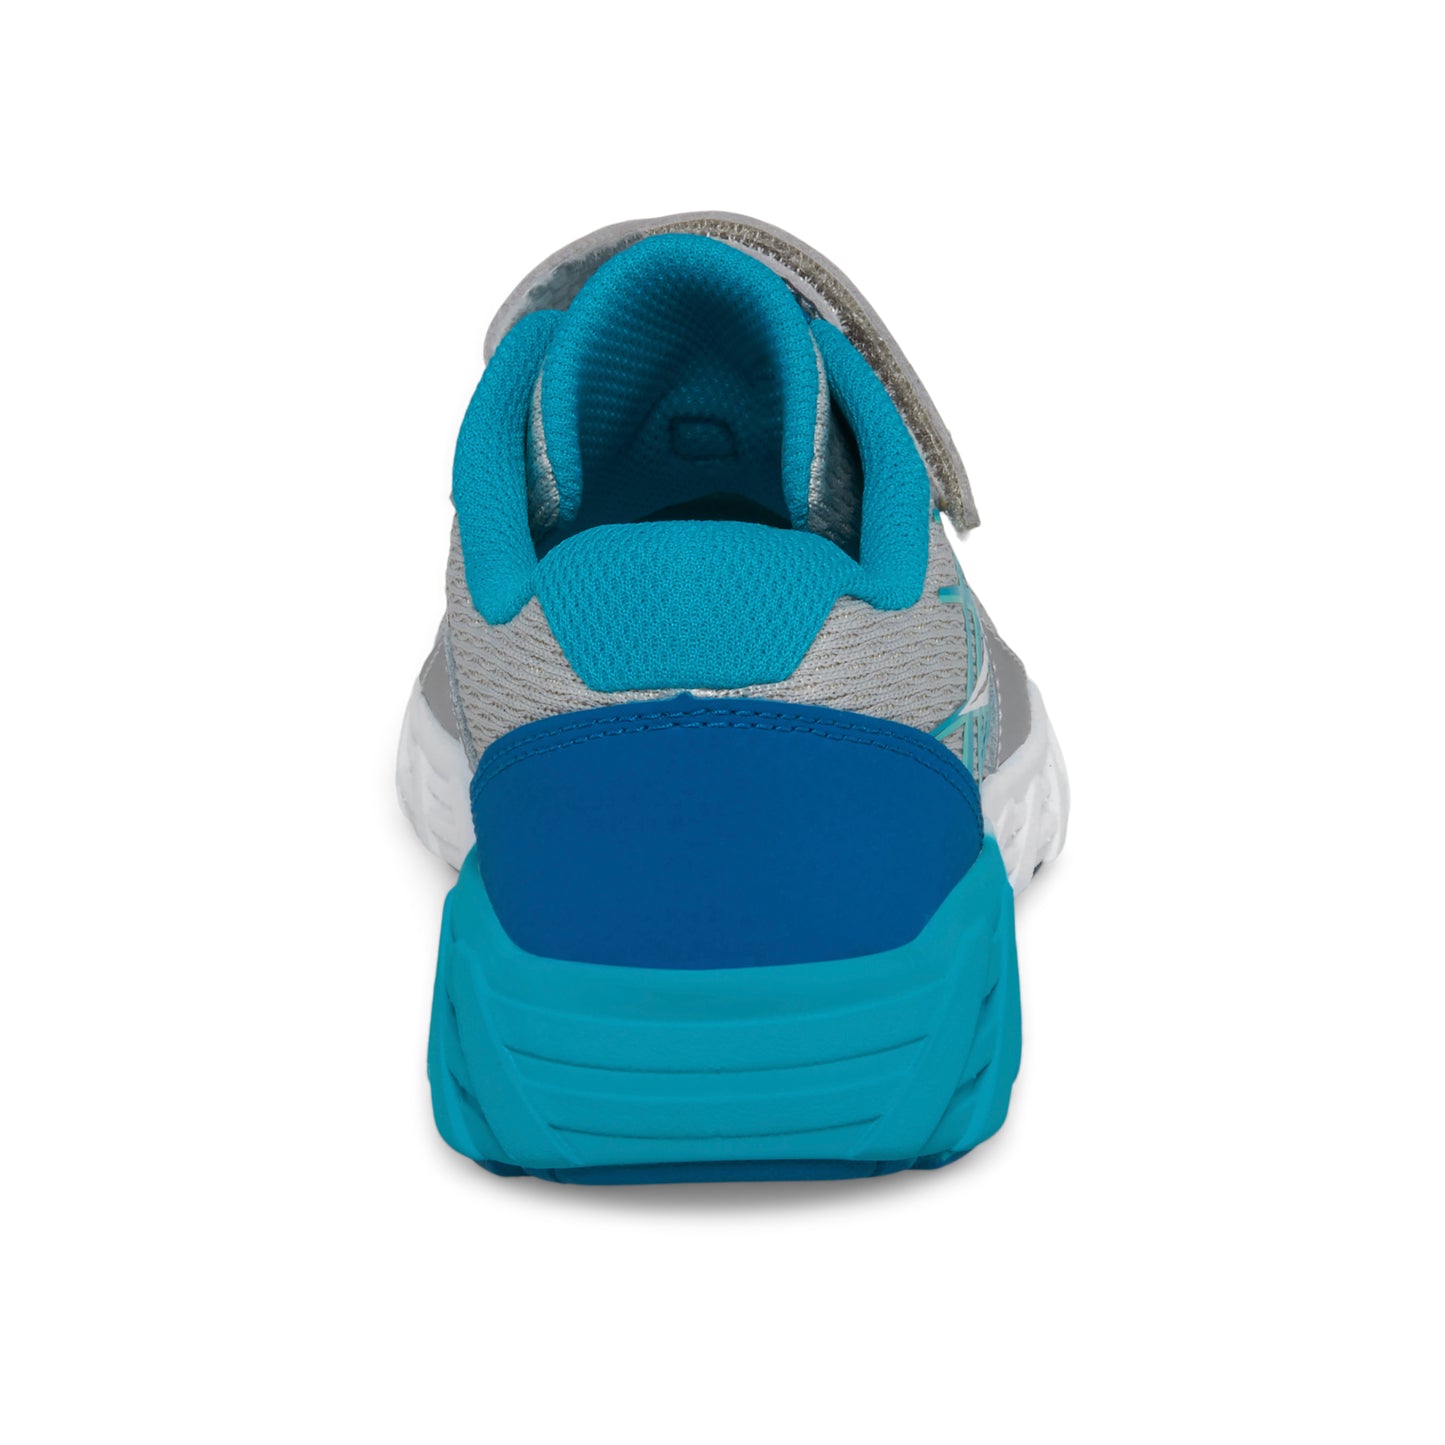 wind-ac-20-sneaker-bigkid-turquoise-silver__Turquoise/Silver_3